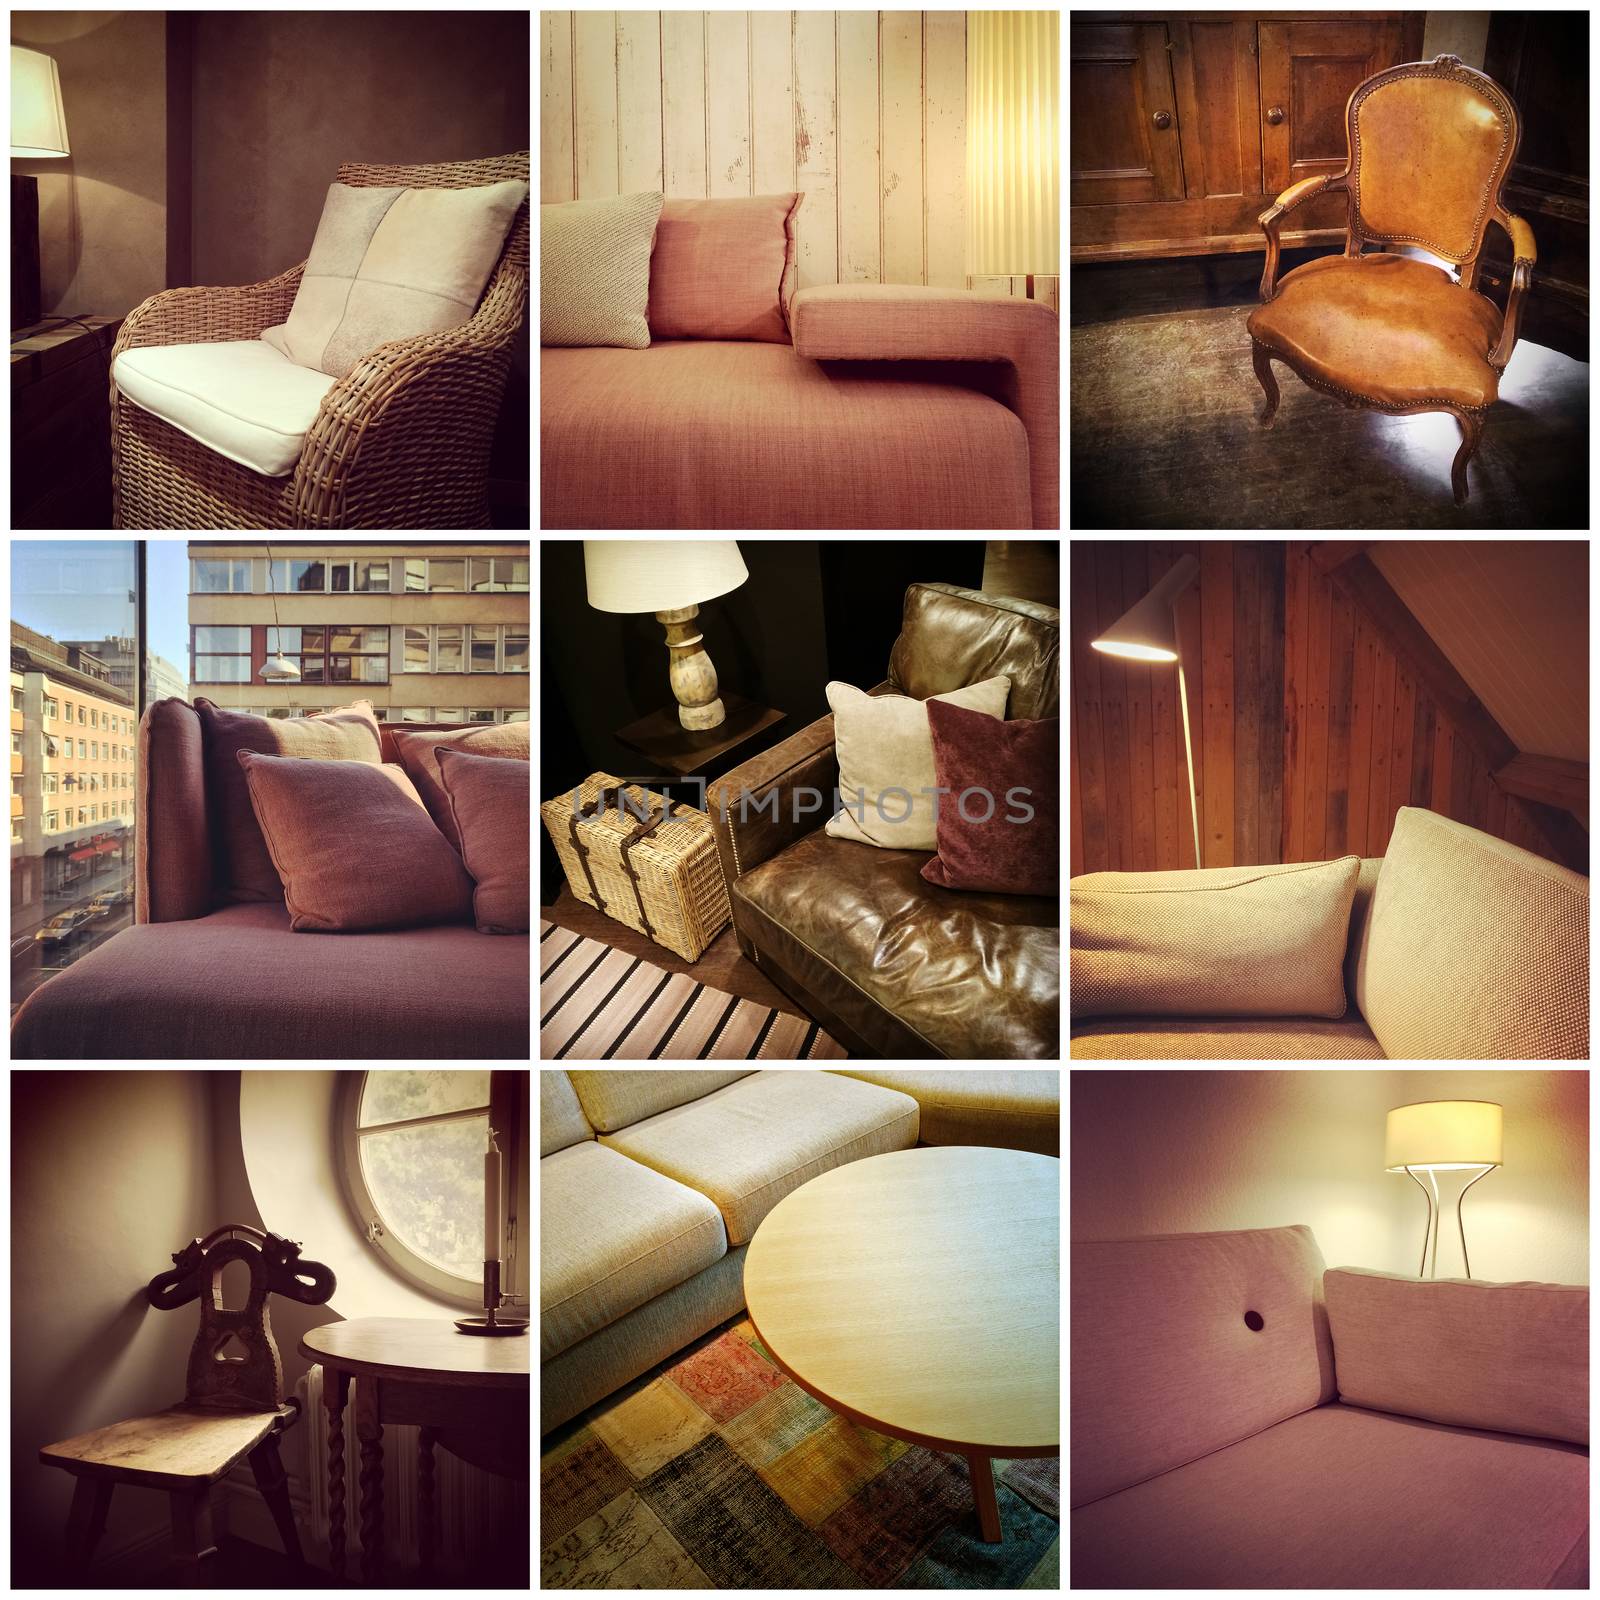 Furnished interiors collage by anikasalsera